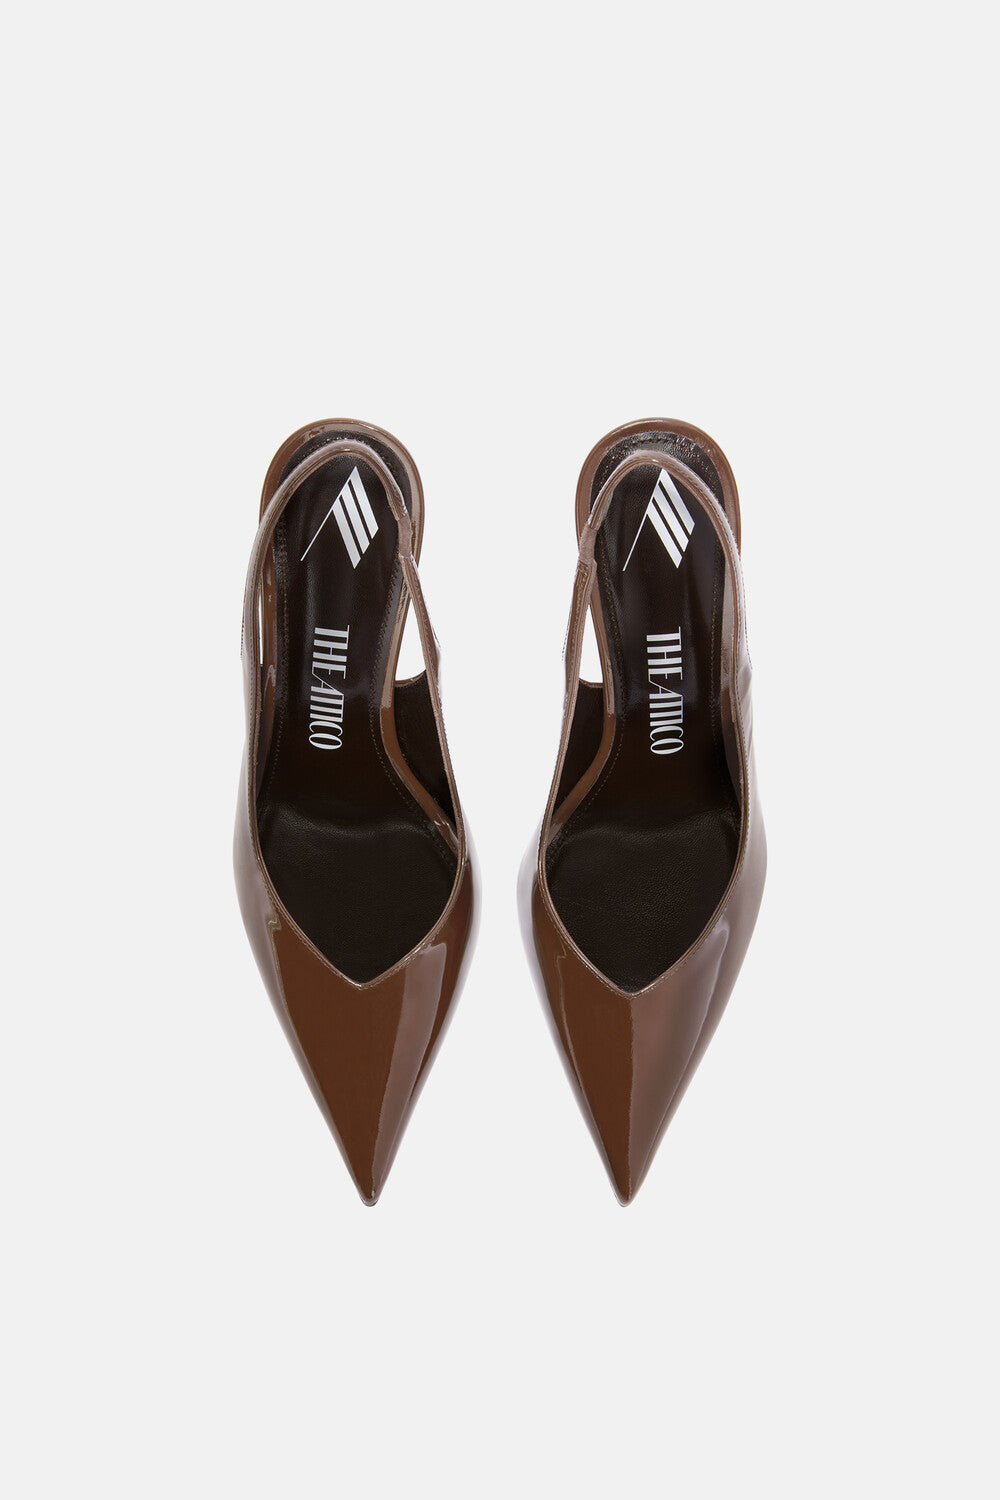 The Attico Cheope Slingback in Chocolate available at The New Trend Australia.